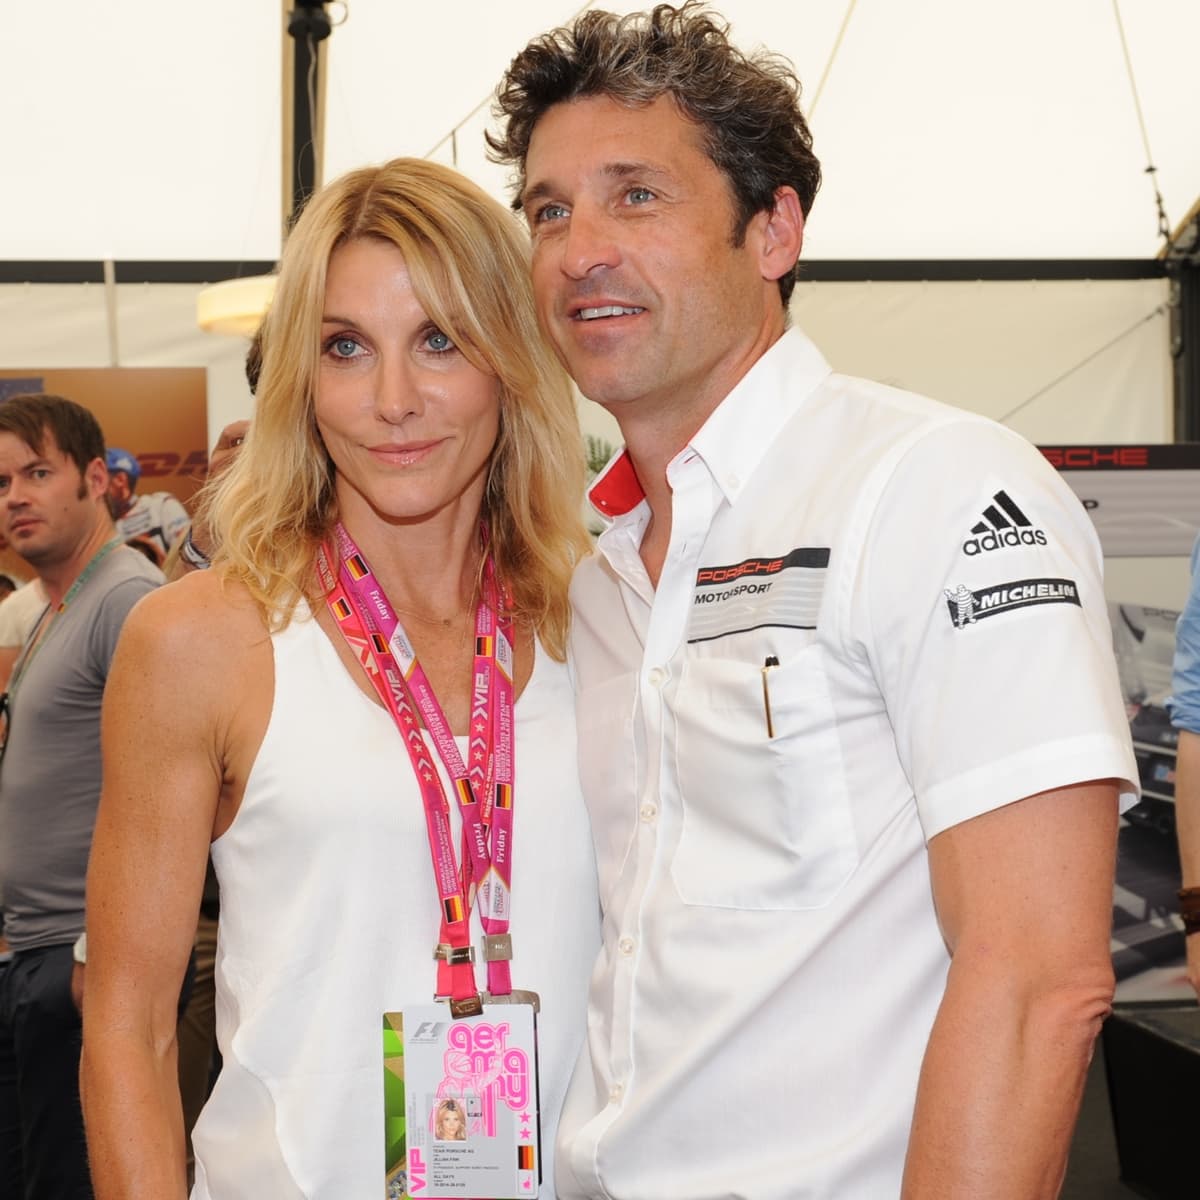 Patrick Dempsey and Jillian Fink met when he visited the salon she was working at